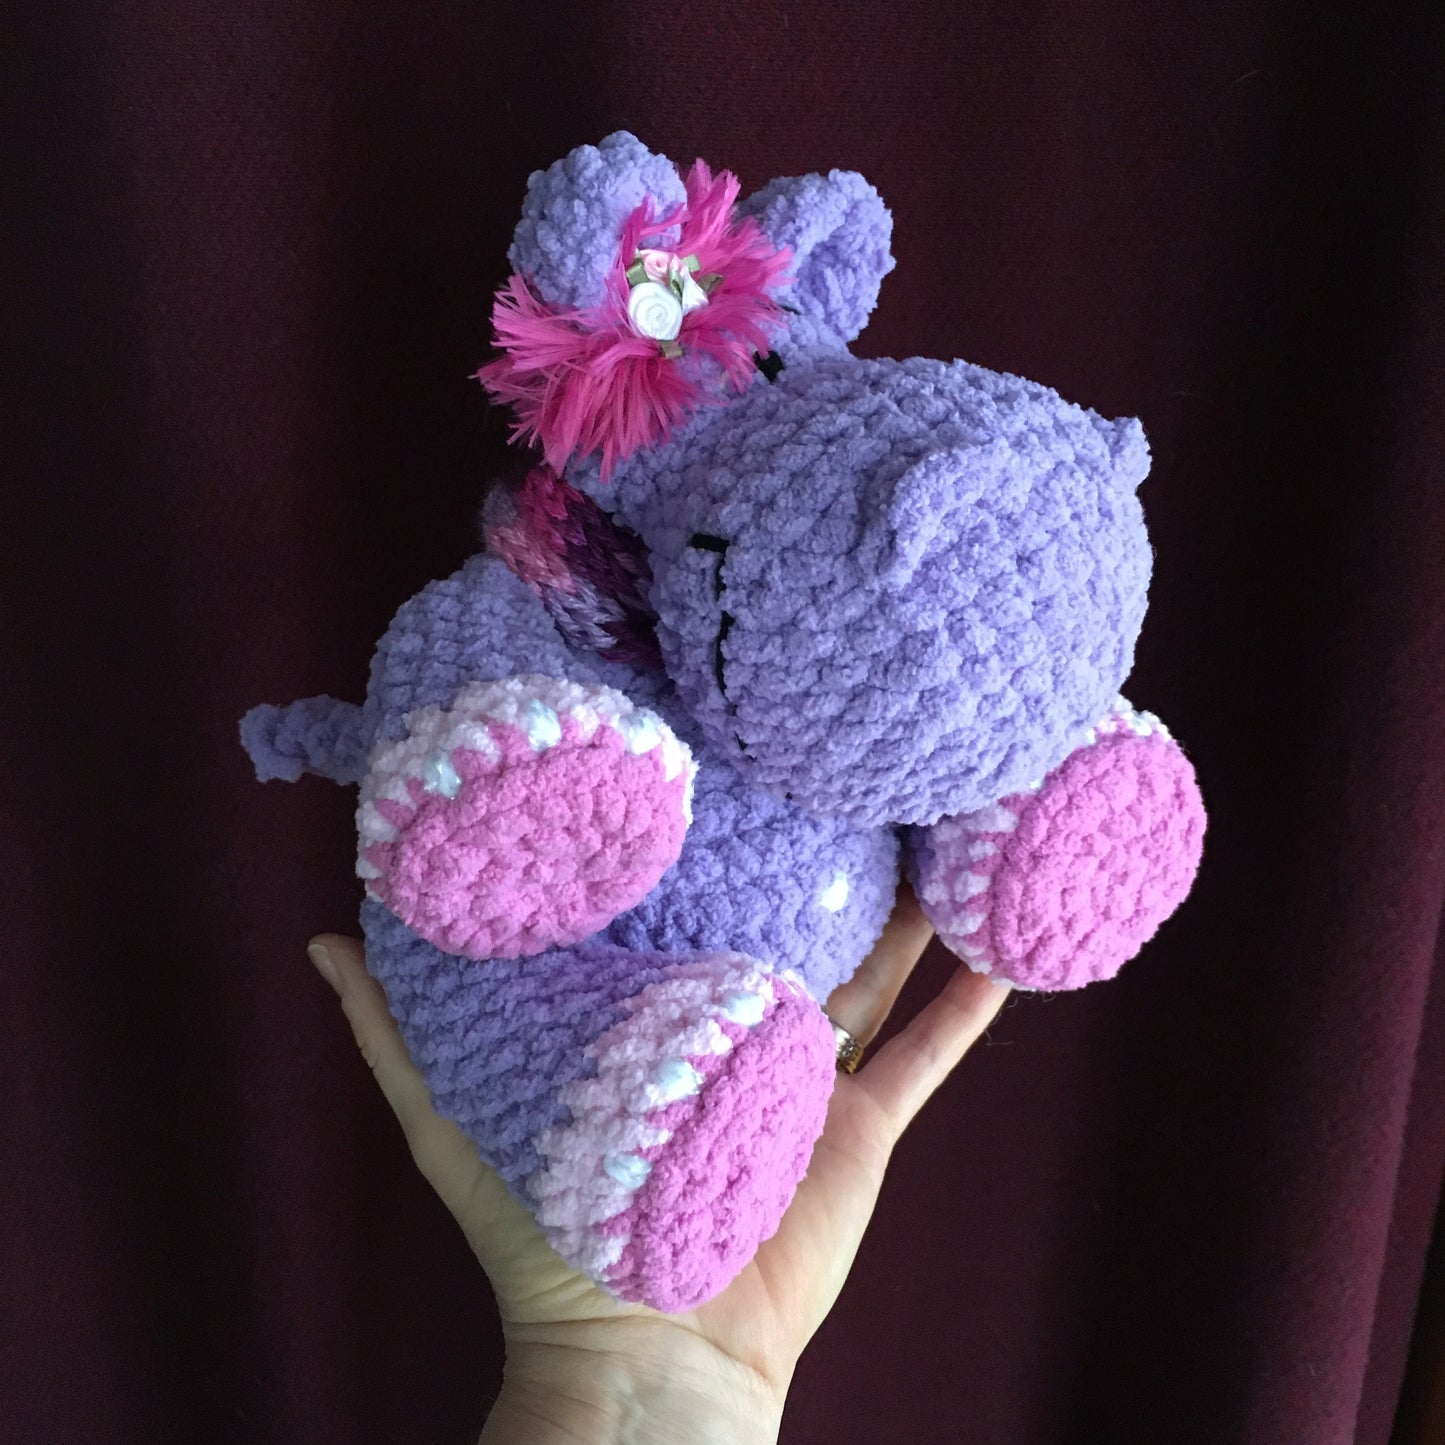 Violette the hippopotamus, crochet pattern to download, French and English PDF